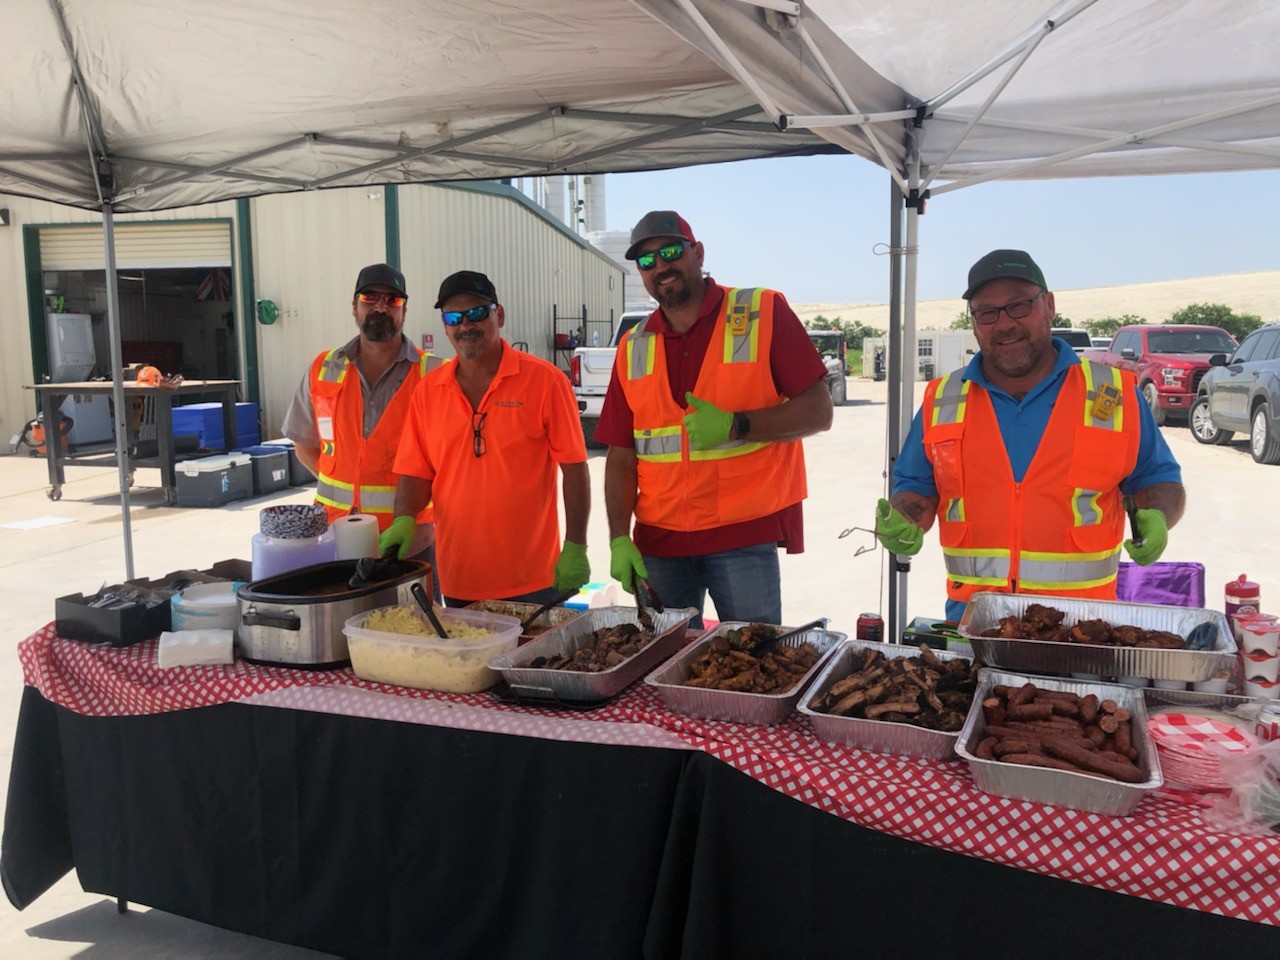 The Management team serving up some BBQ for our hungry team.